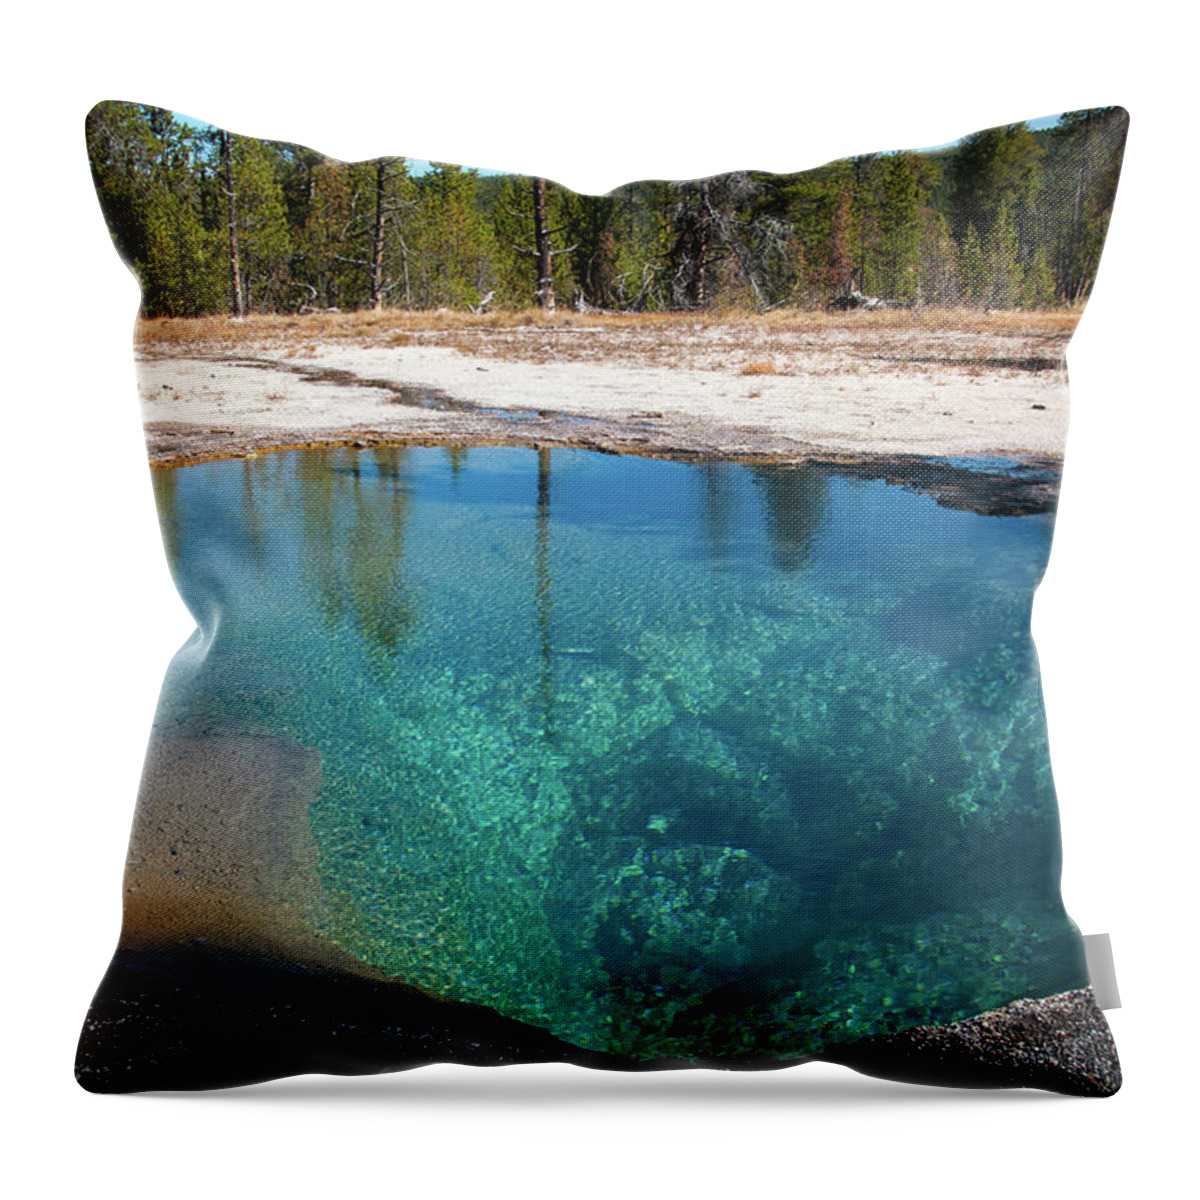 Yellowstone Throw Pillow featuring the photograph Blue Hot Spring by Steve Stuller